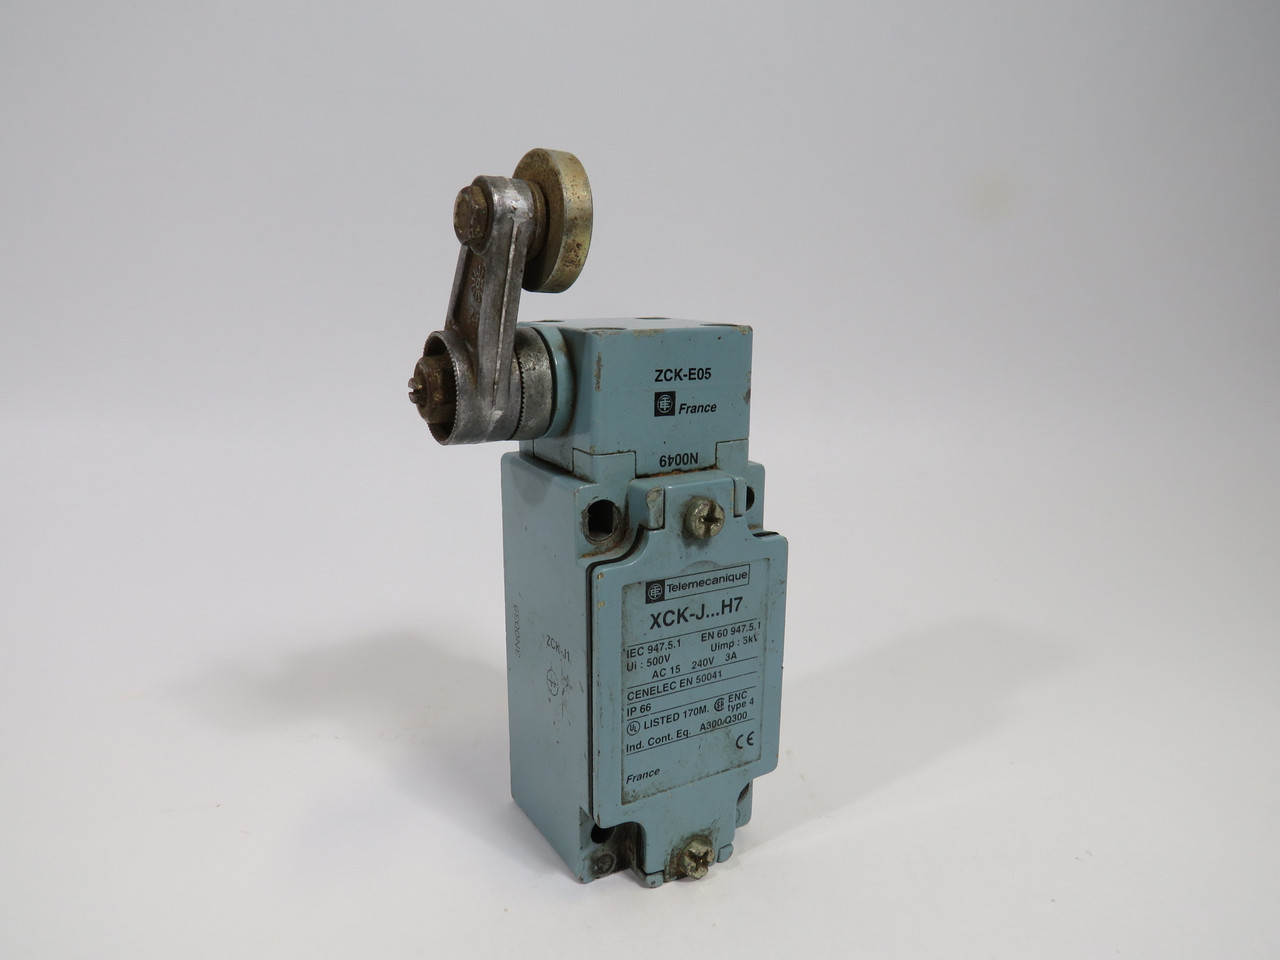 Telemecanique XCK-J1H7 Limit Switch 240V 3A C/W Rotary Lever Head USED